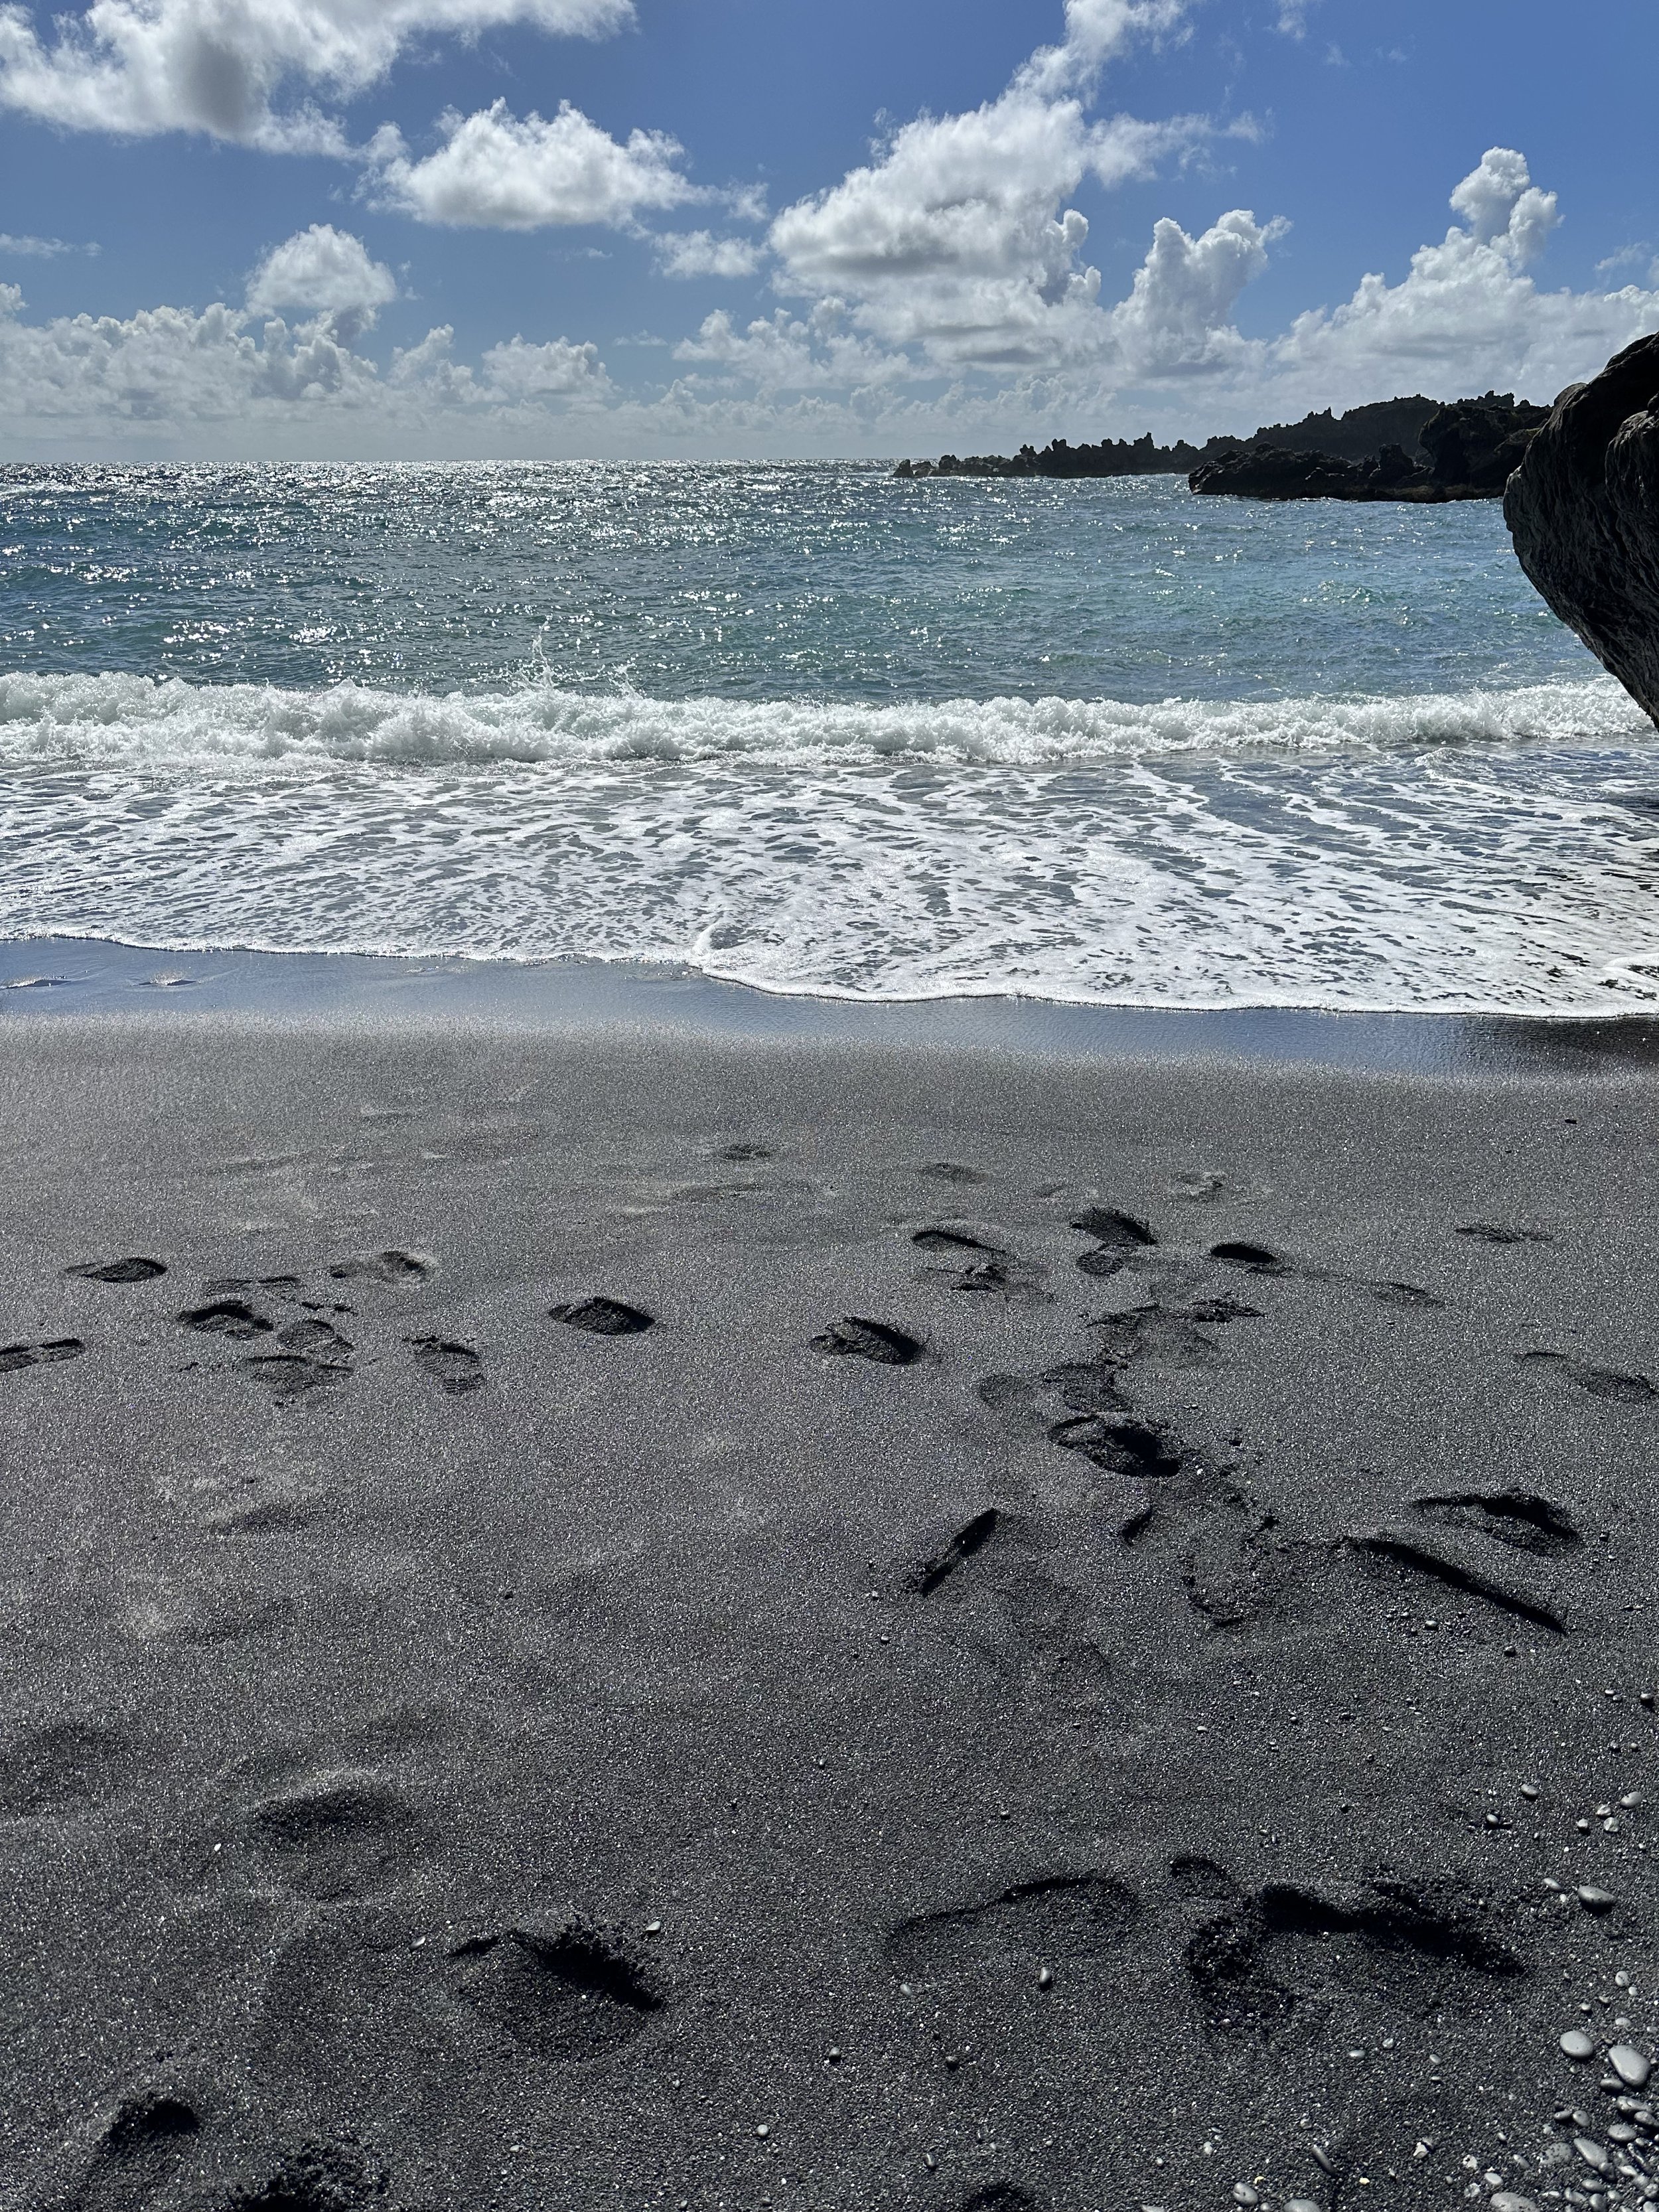 Black sand beach in person is so cool